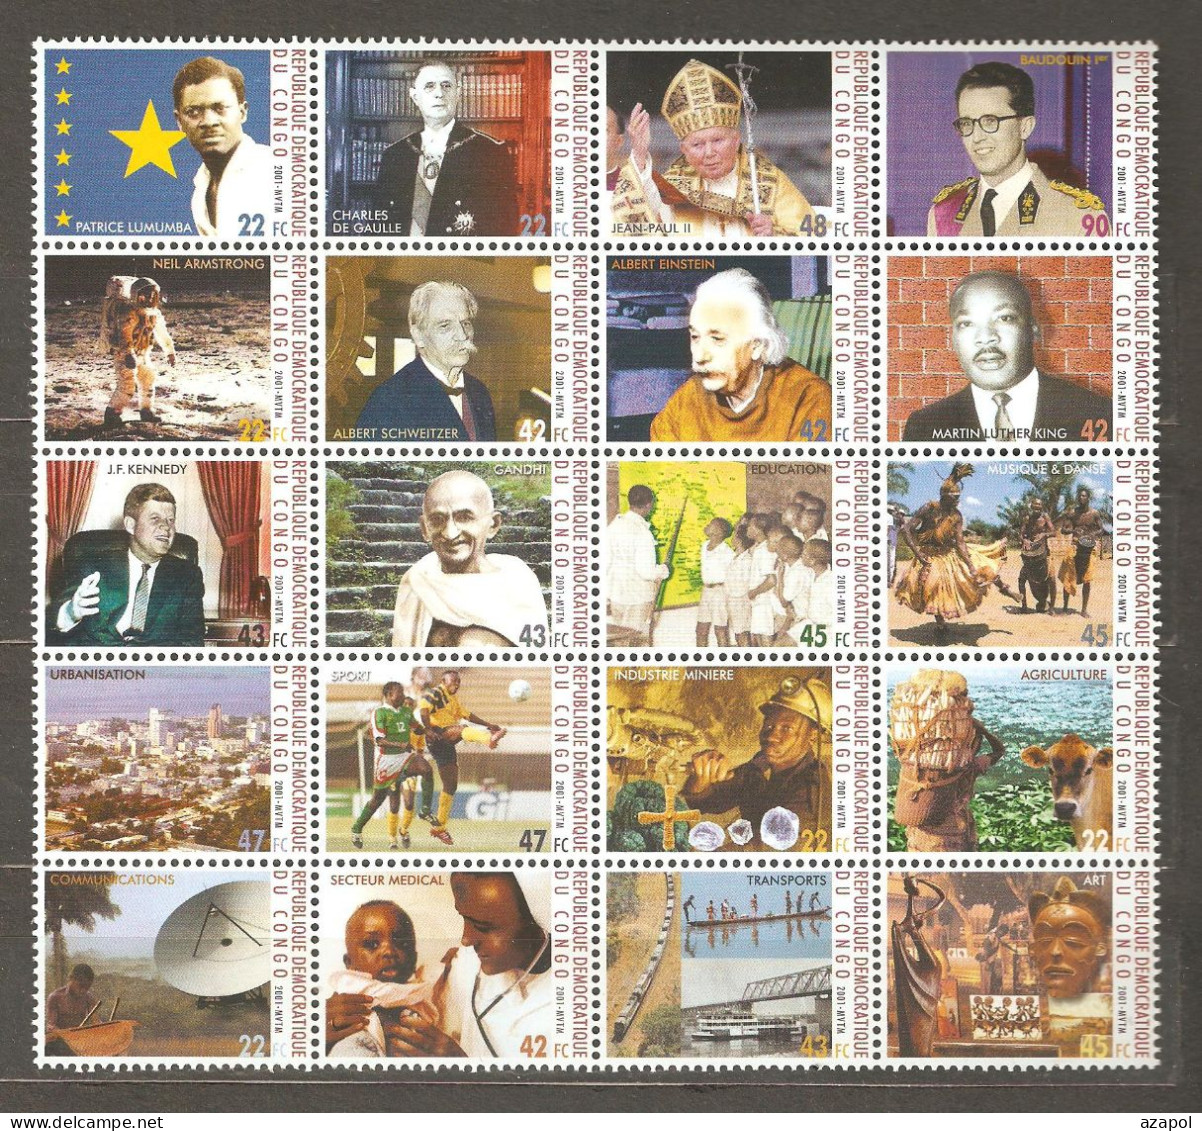 Congo: Full Set Of 20 Mint Stamps In Sheet, Famouse People & Events In 20-th Century, 2001, MNH - Neufs